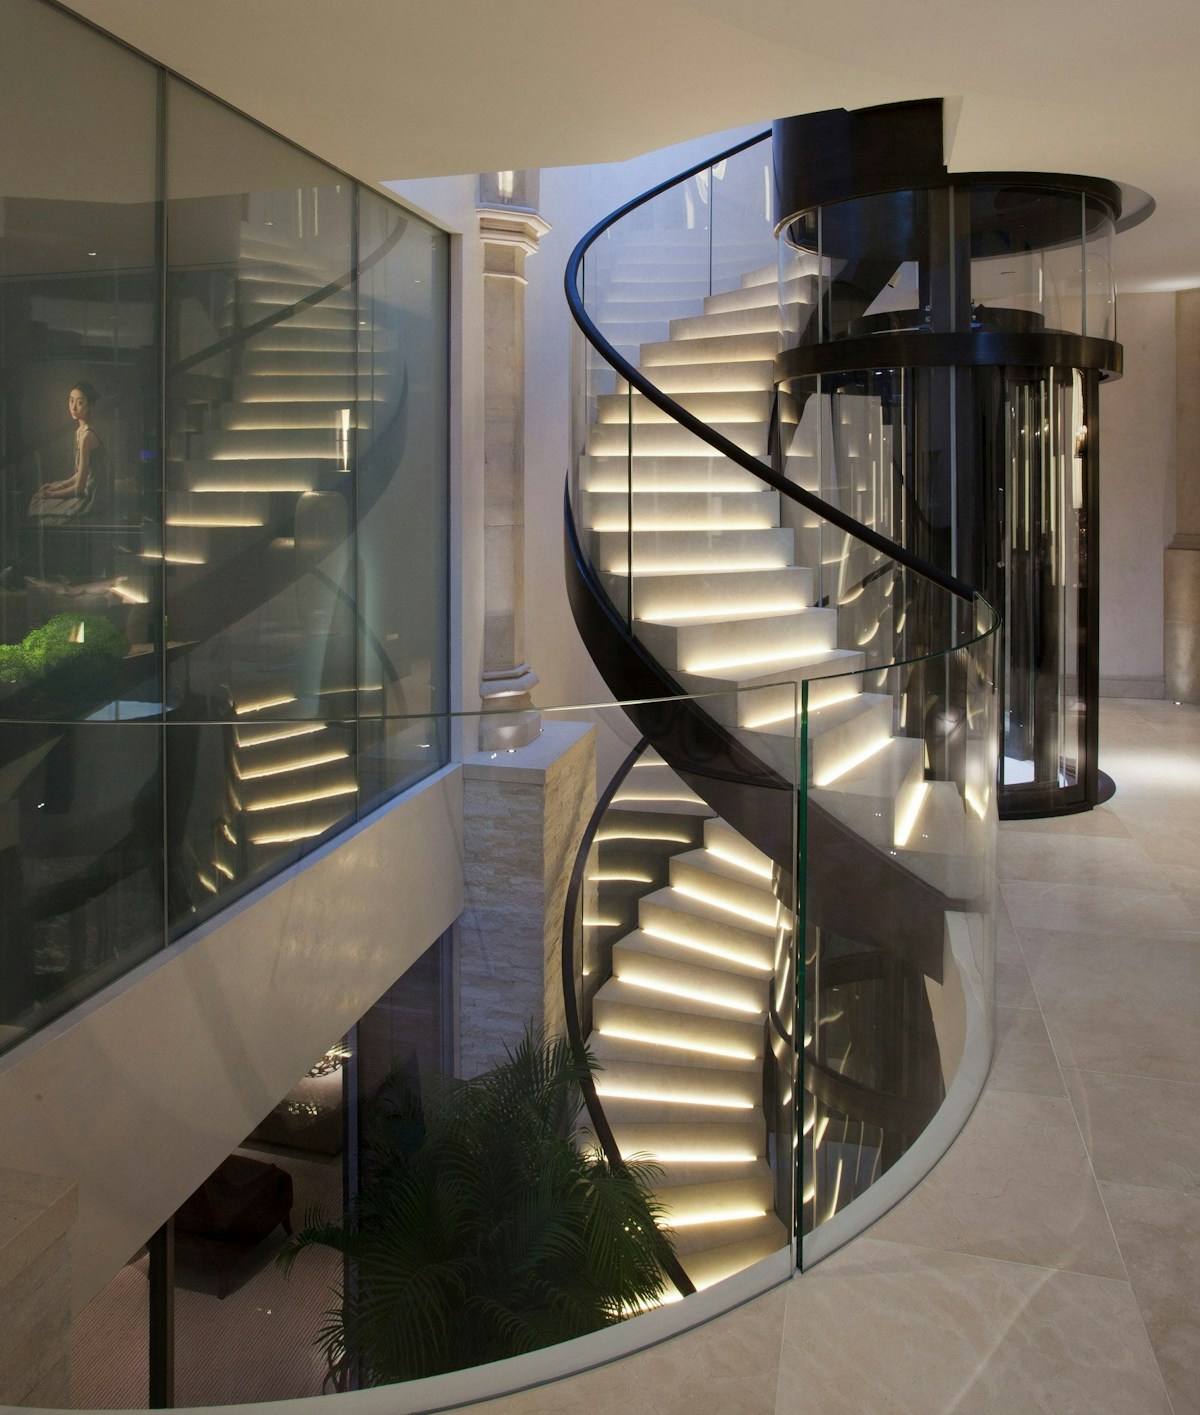 Beautiful Staircase Ideas For Your Home - spiral staircase - LuxDeco.com Style Guide